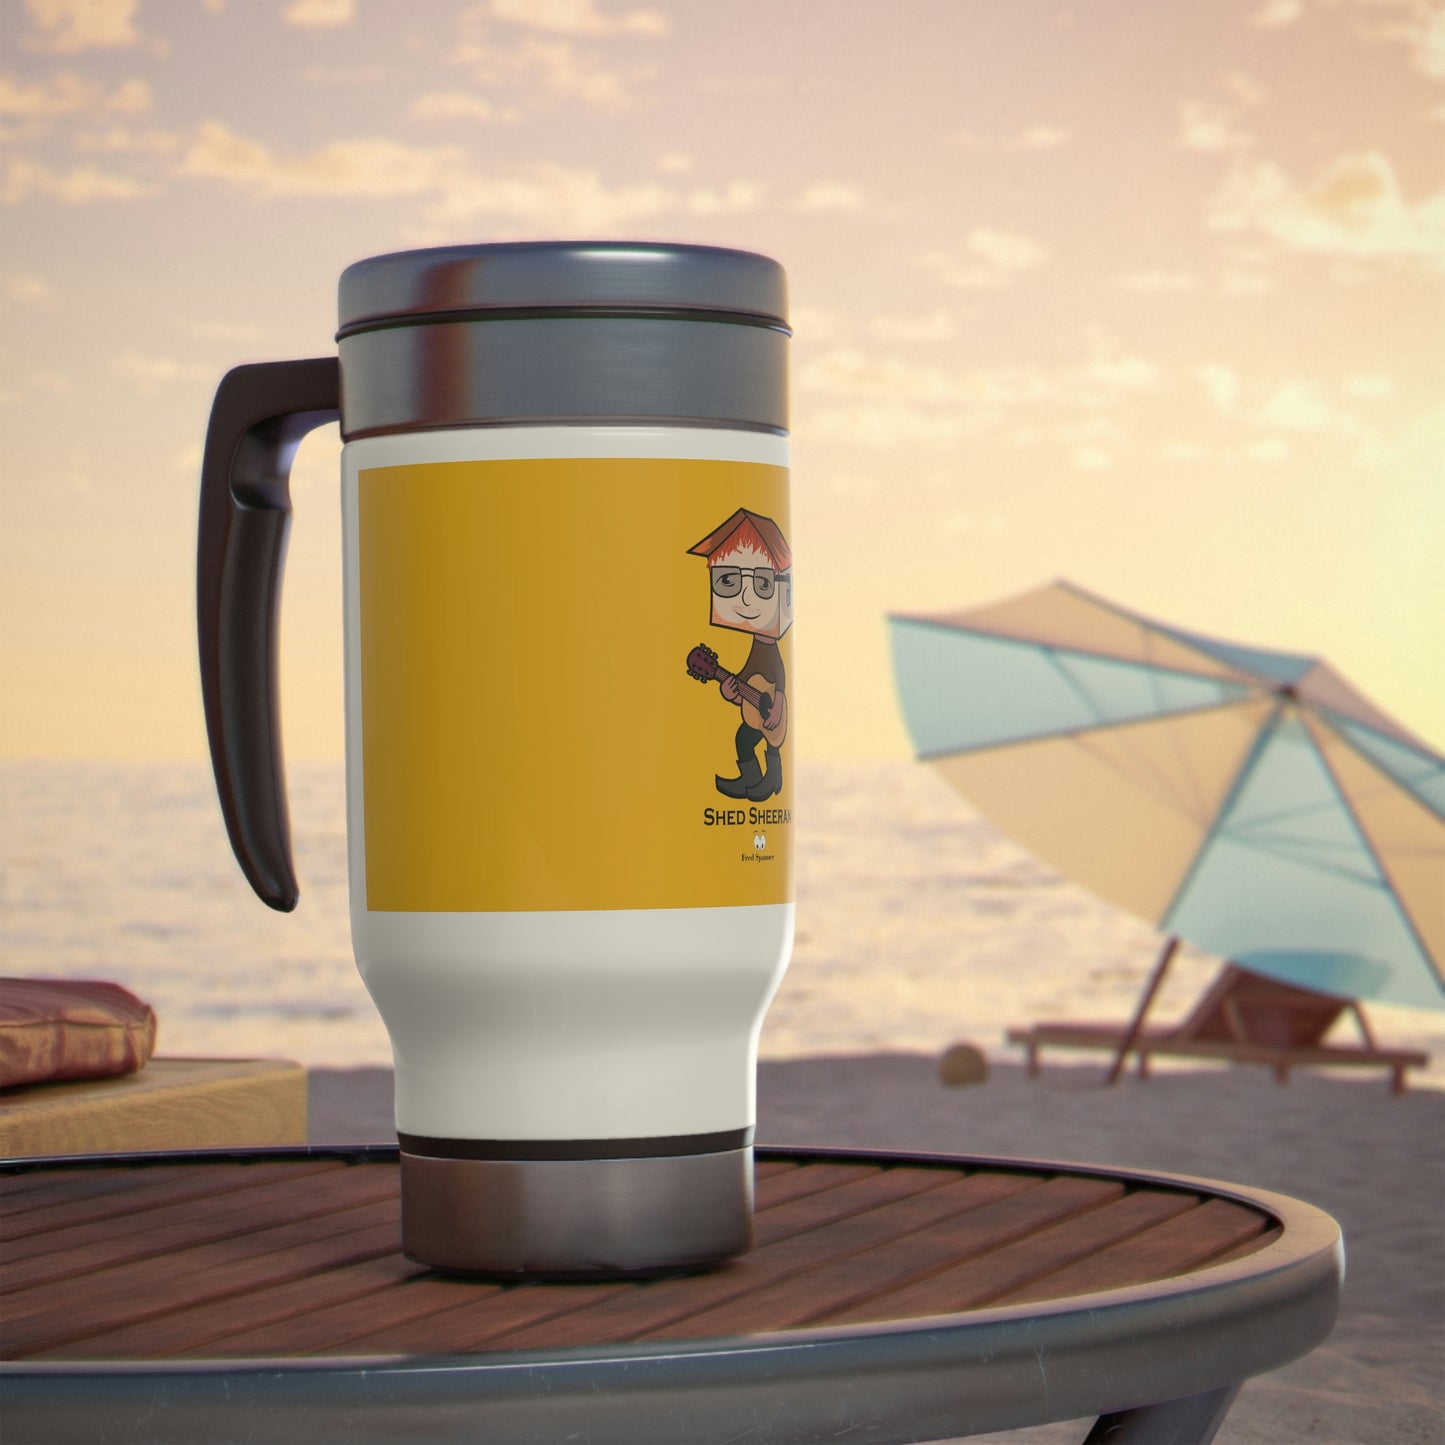 Shed Sheeran Stainless Steel Travel Mug with Handle